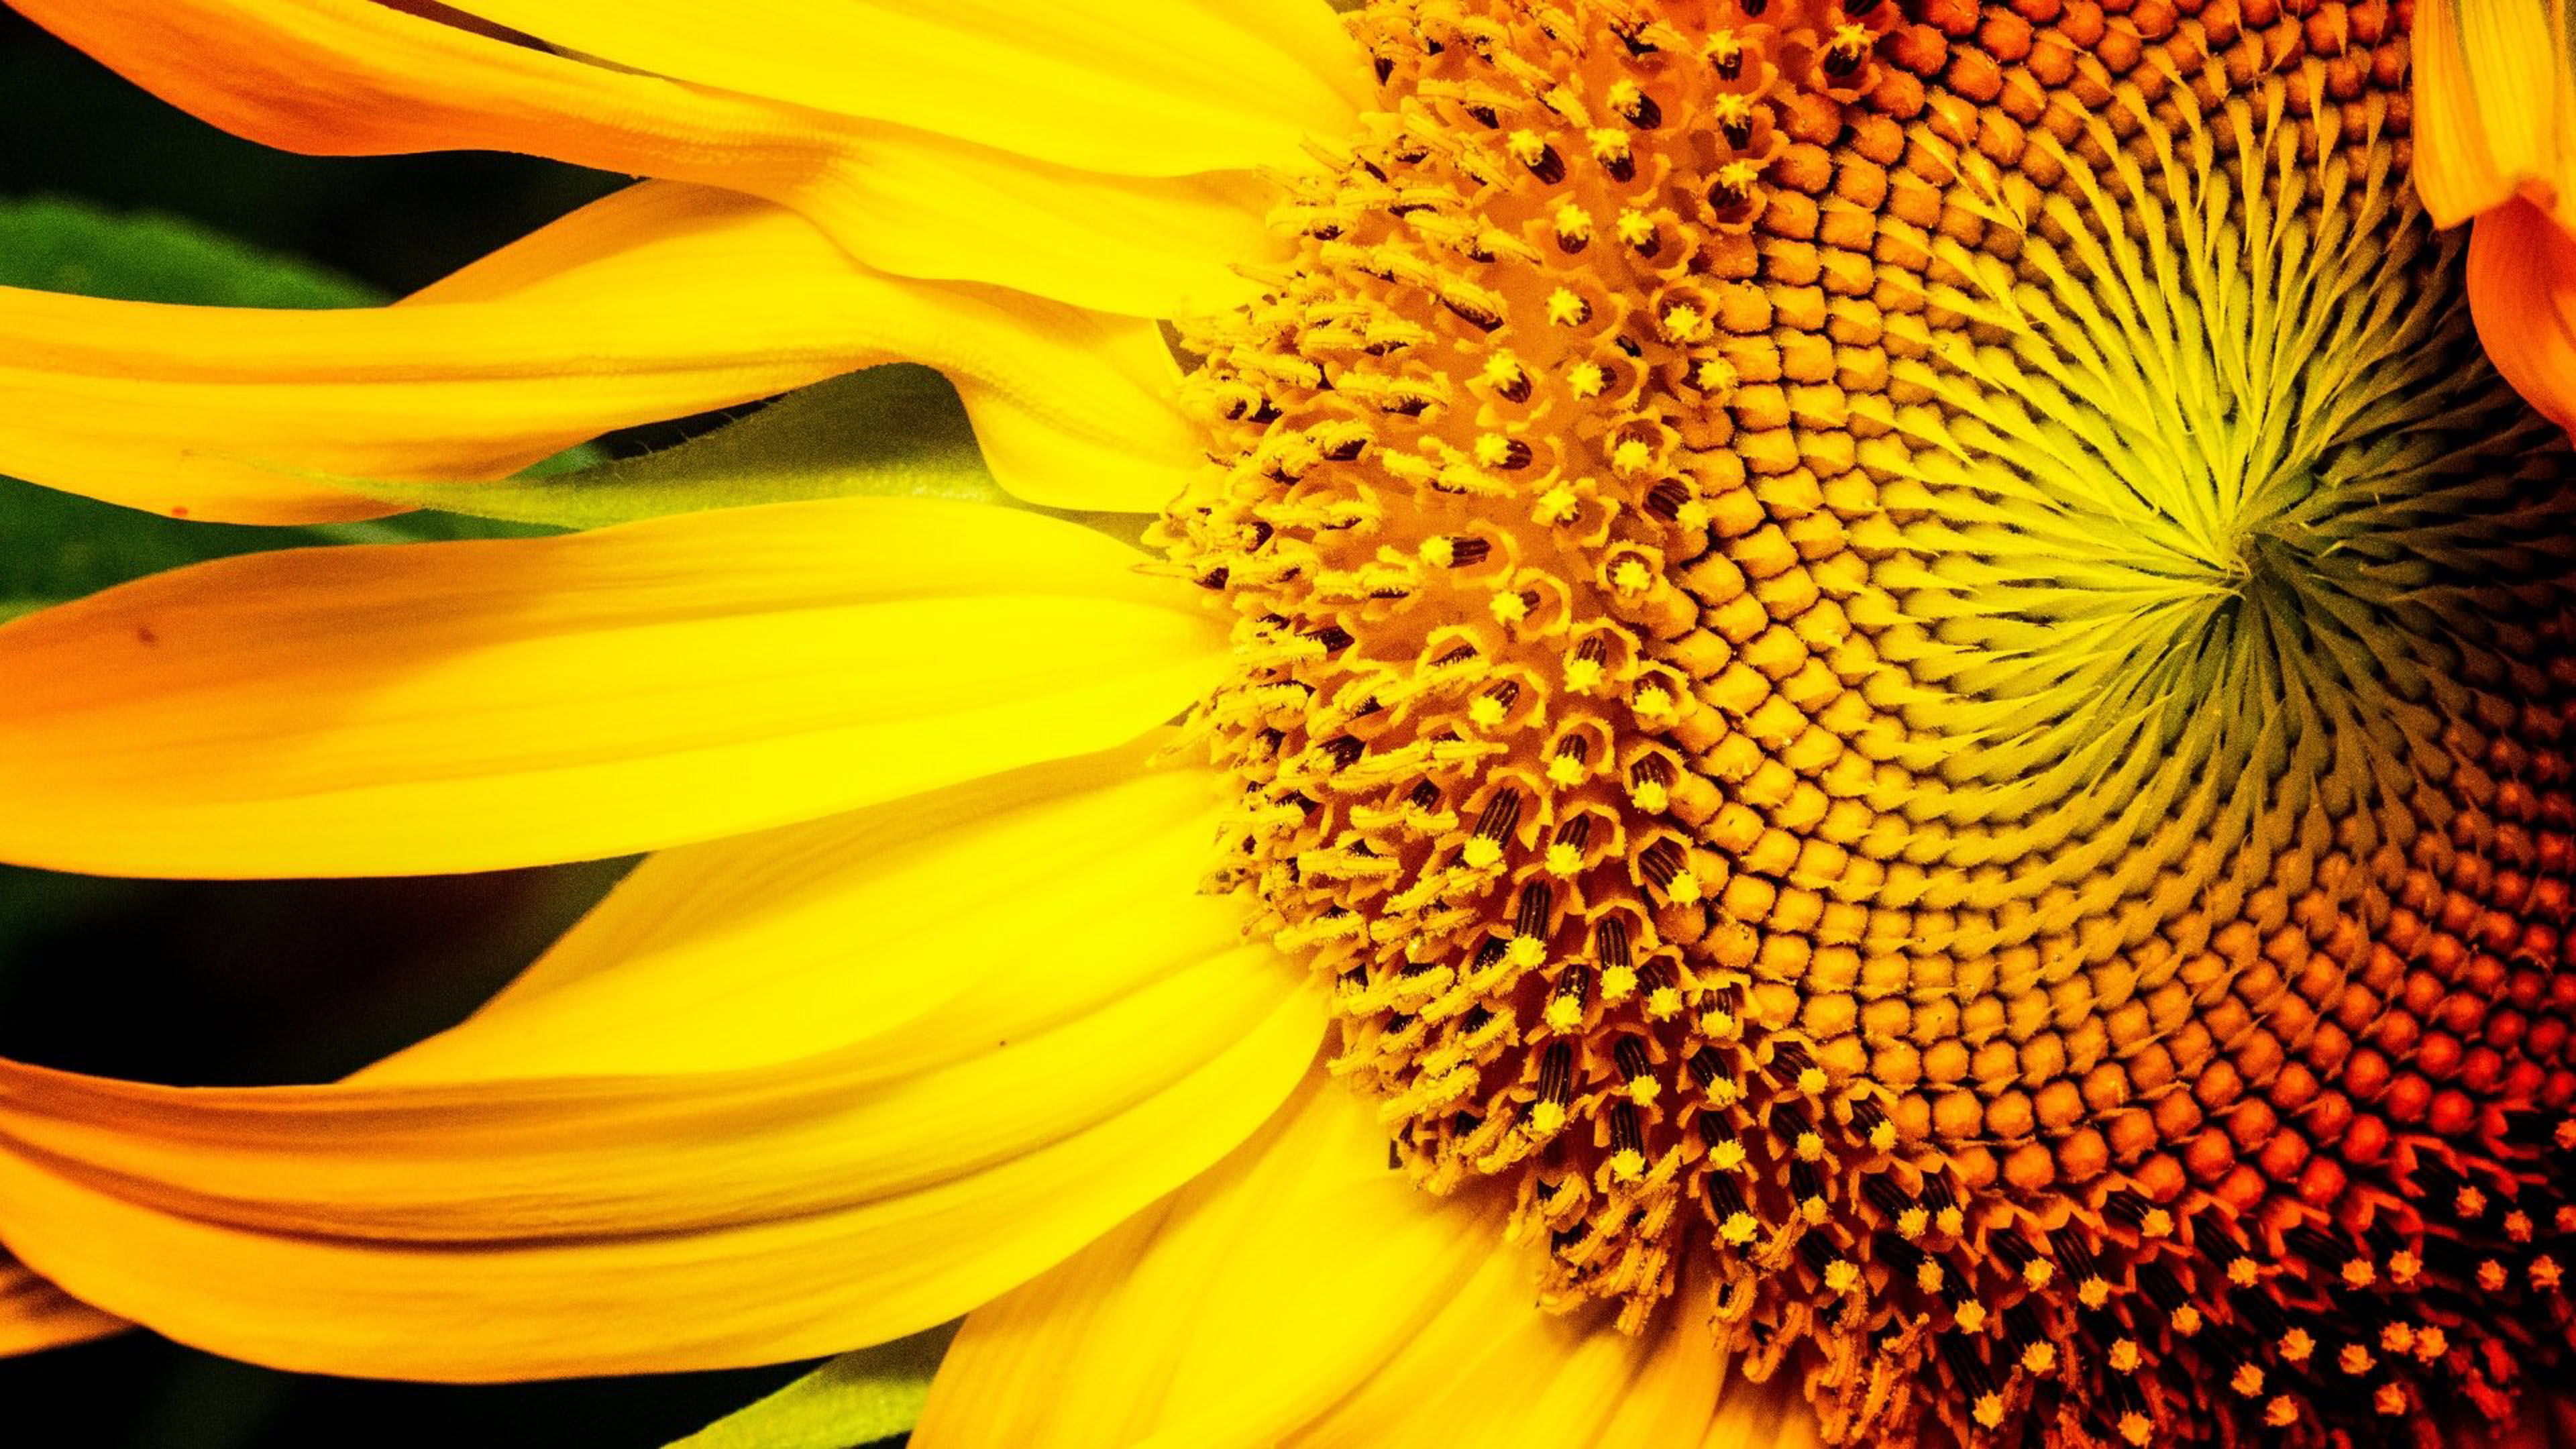 Sunflower Yellow Color Macro Photography 4k Ultra Hd Wallpapers For